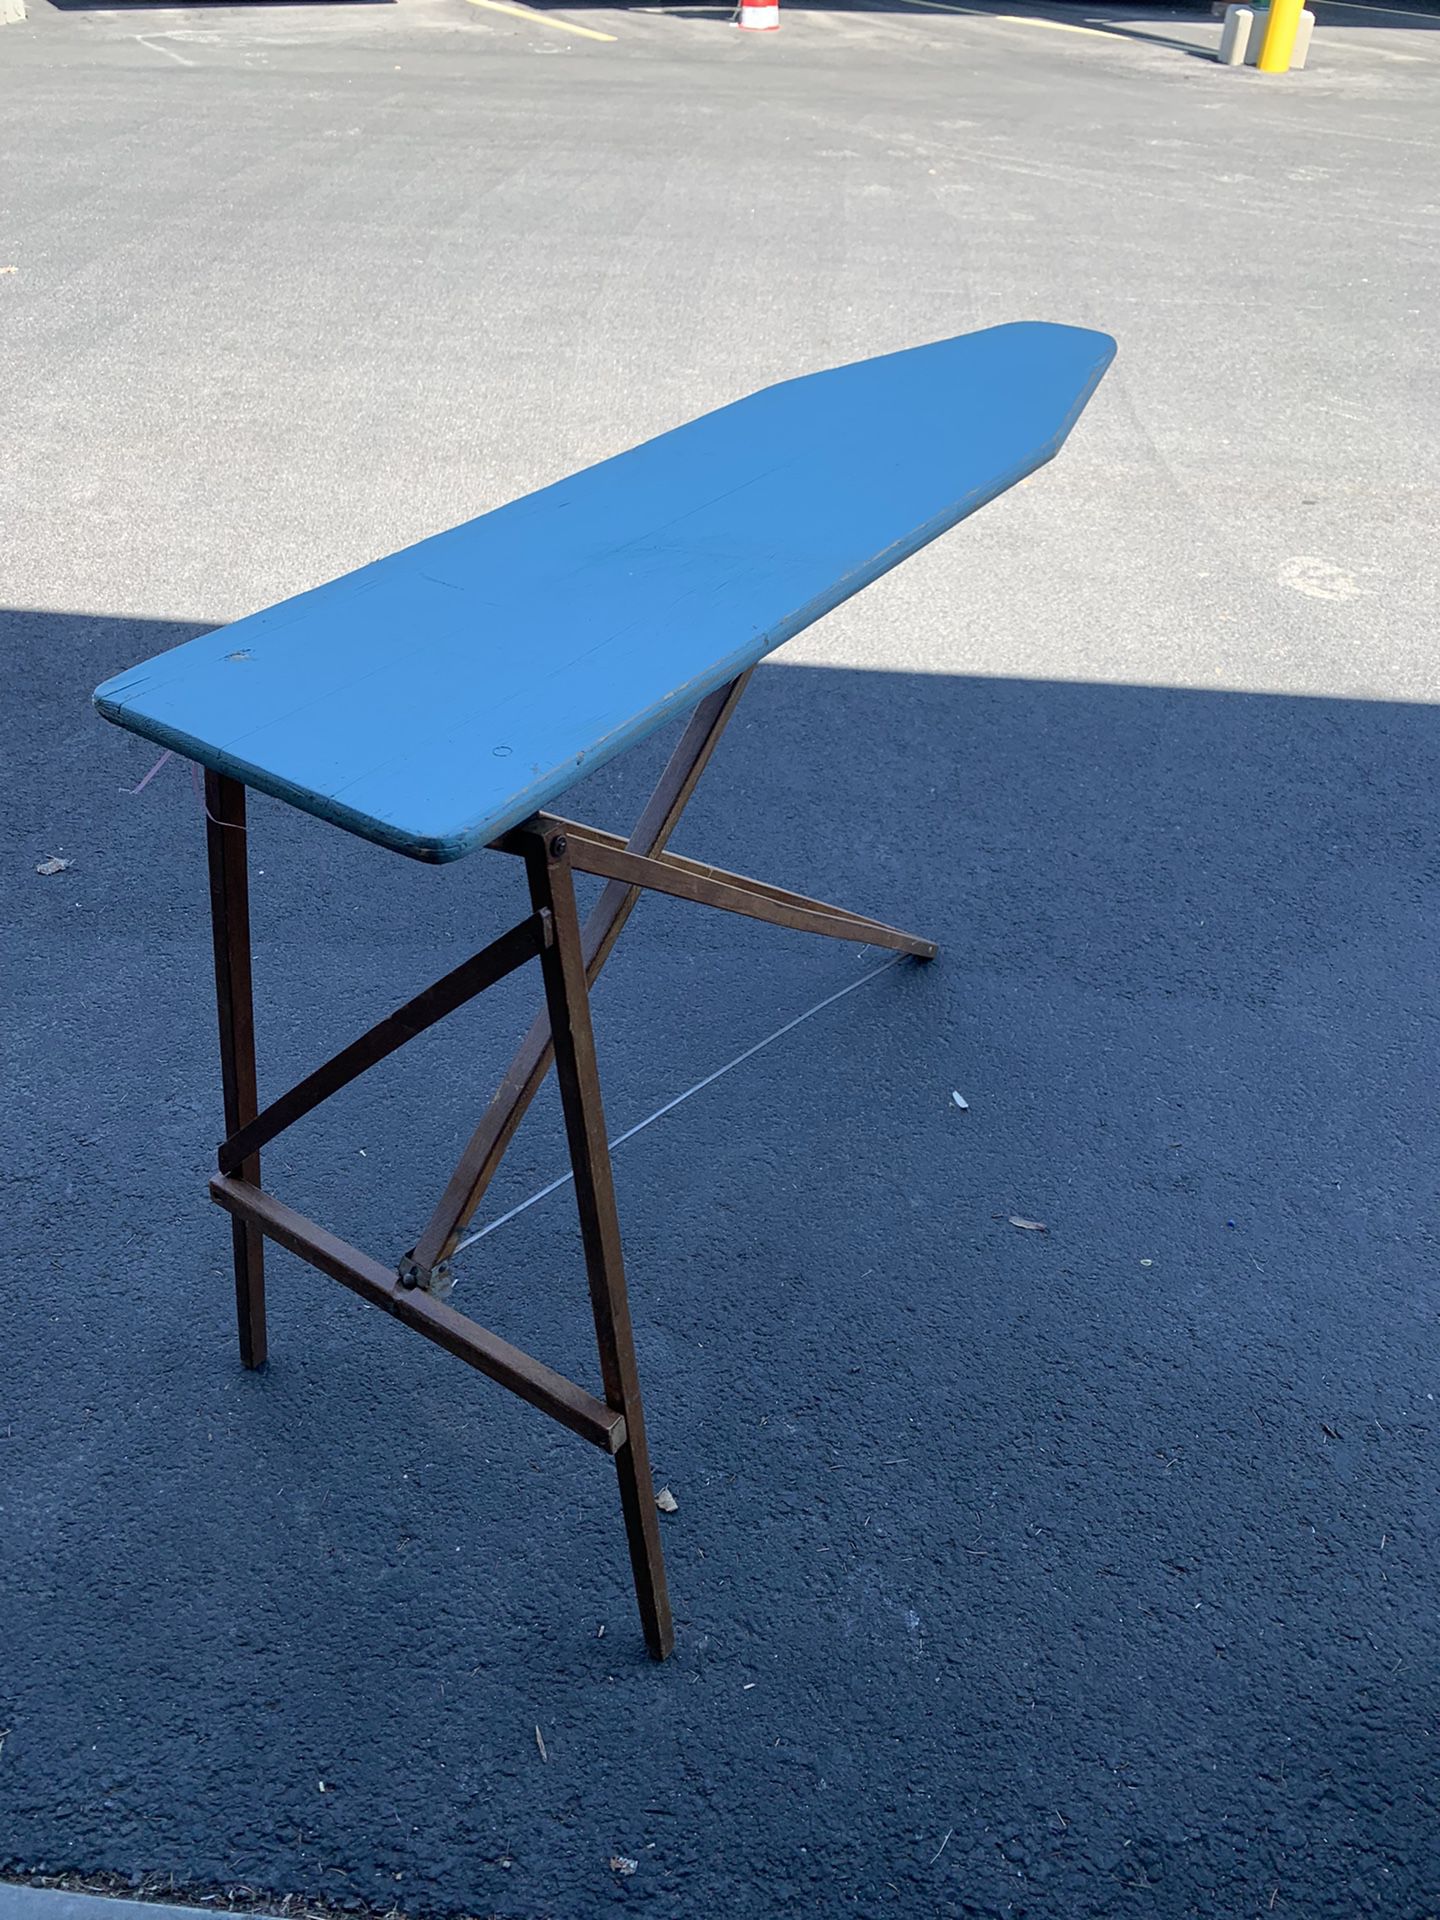 Antique Ironing Board Very Nice Patina!